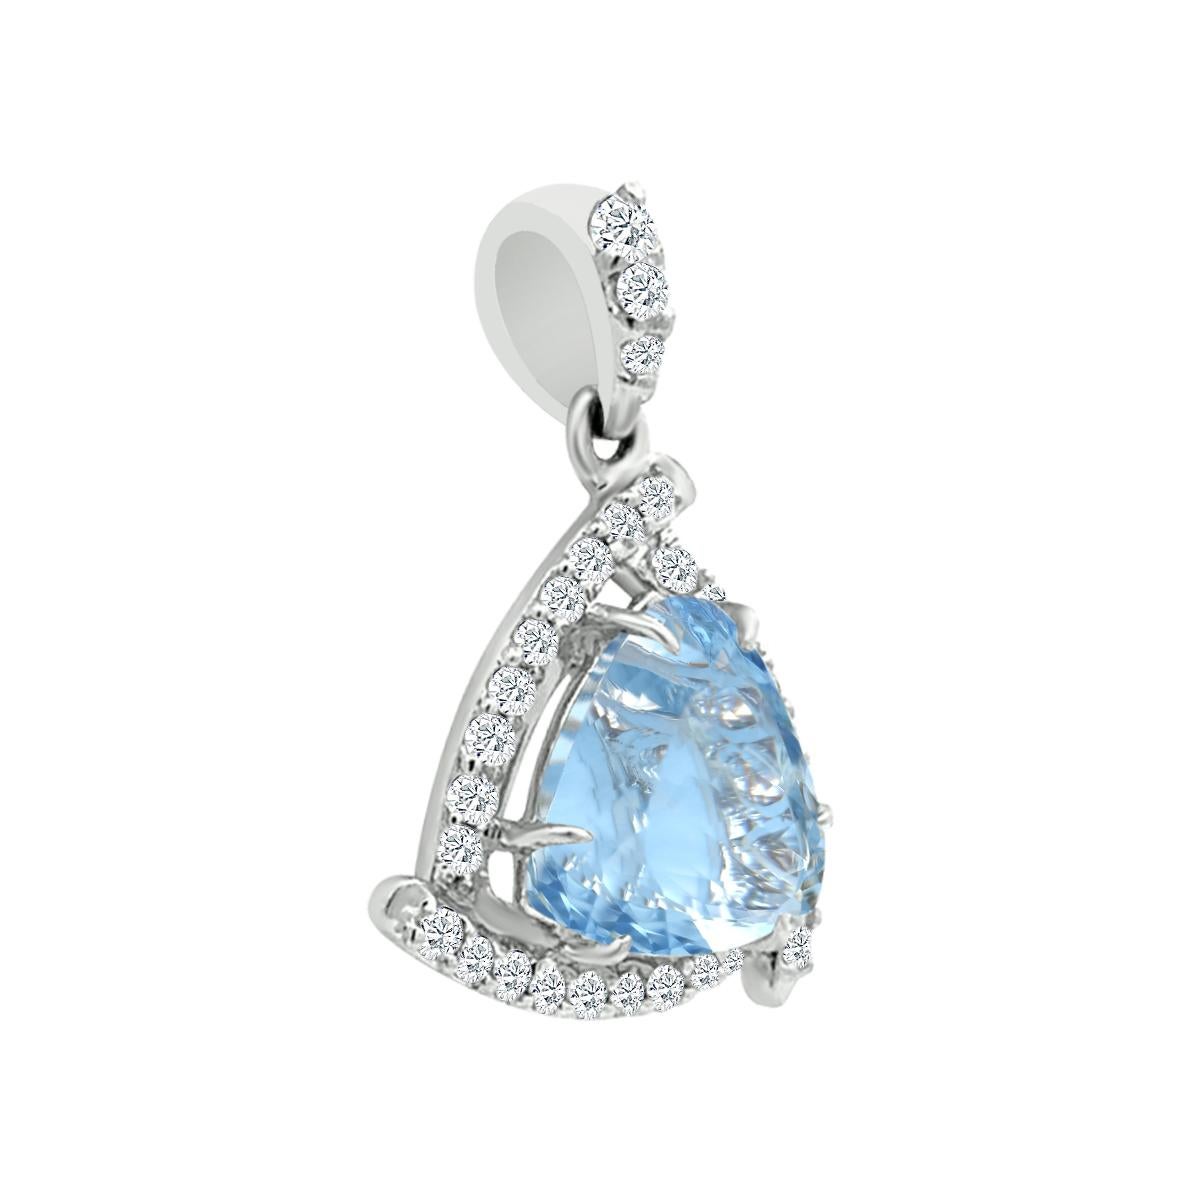 Wear This Triangular Shaped Aquamarine And Diamond Pendant For A Regal Update To Your Look.
This Pendant Features A Trillion Cut 7mm Aquamarine Gemstone Framed By Halo Diamonds. The Pendant Is Set In 14K White Gold.
Surprise Your Birthday Girl With